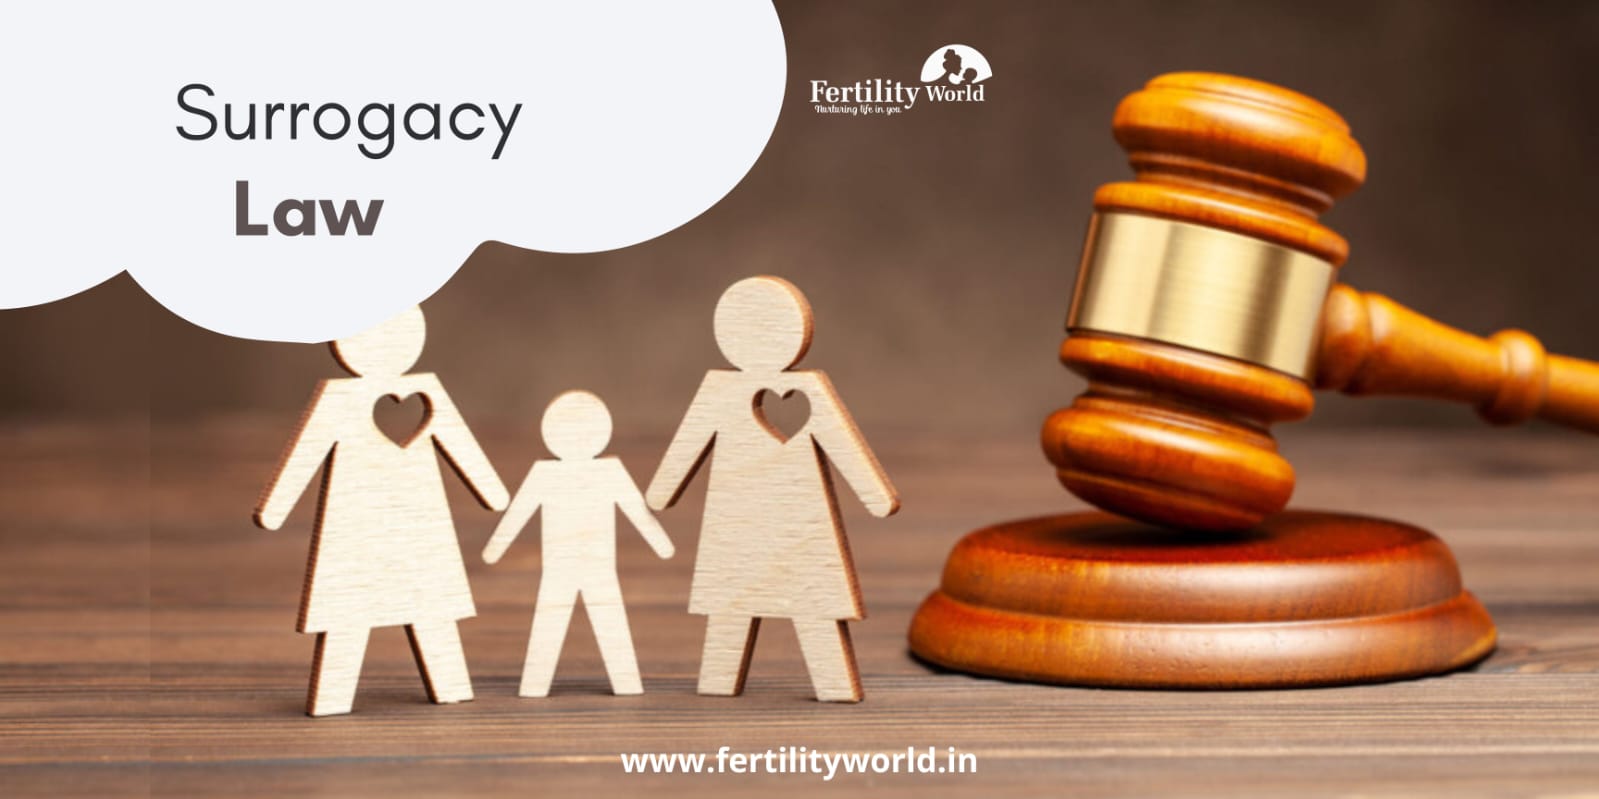 Is surrogacy legal in India?